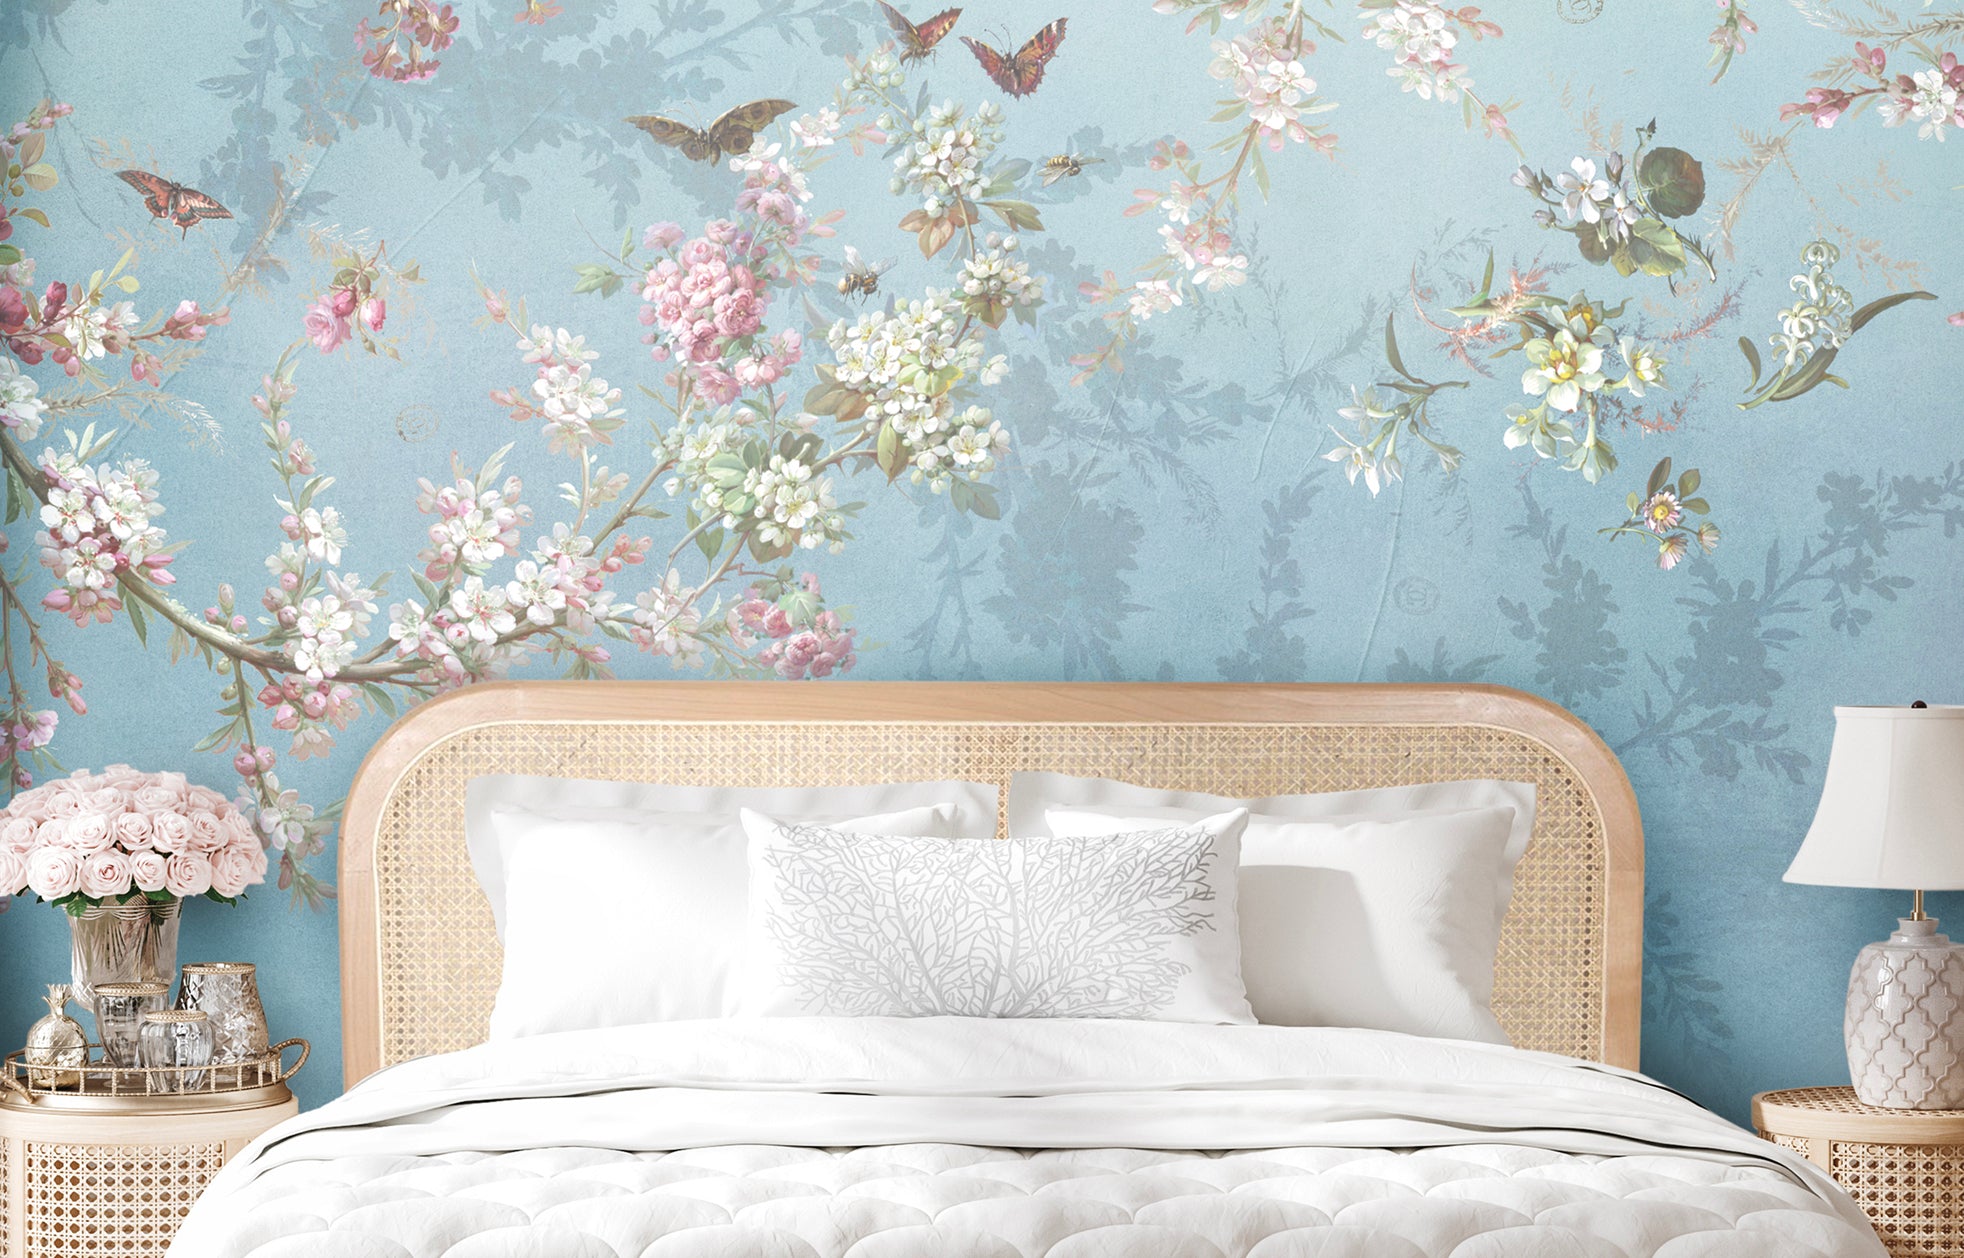 Dreamy mural wallpaper featuring delicate blossom branches with butterflies on a soft duck egg blue background.